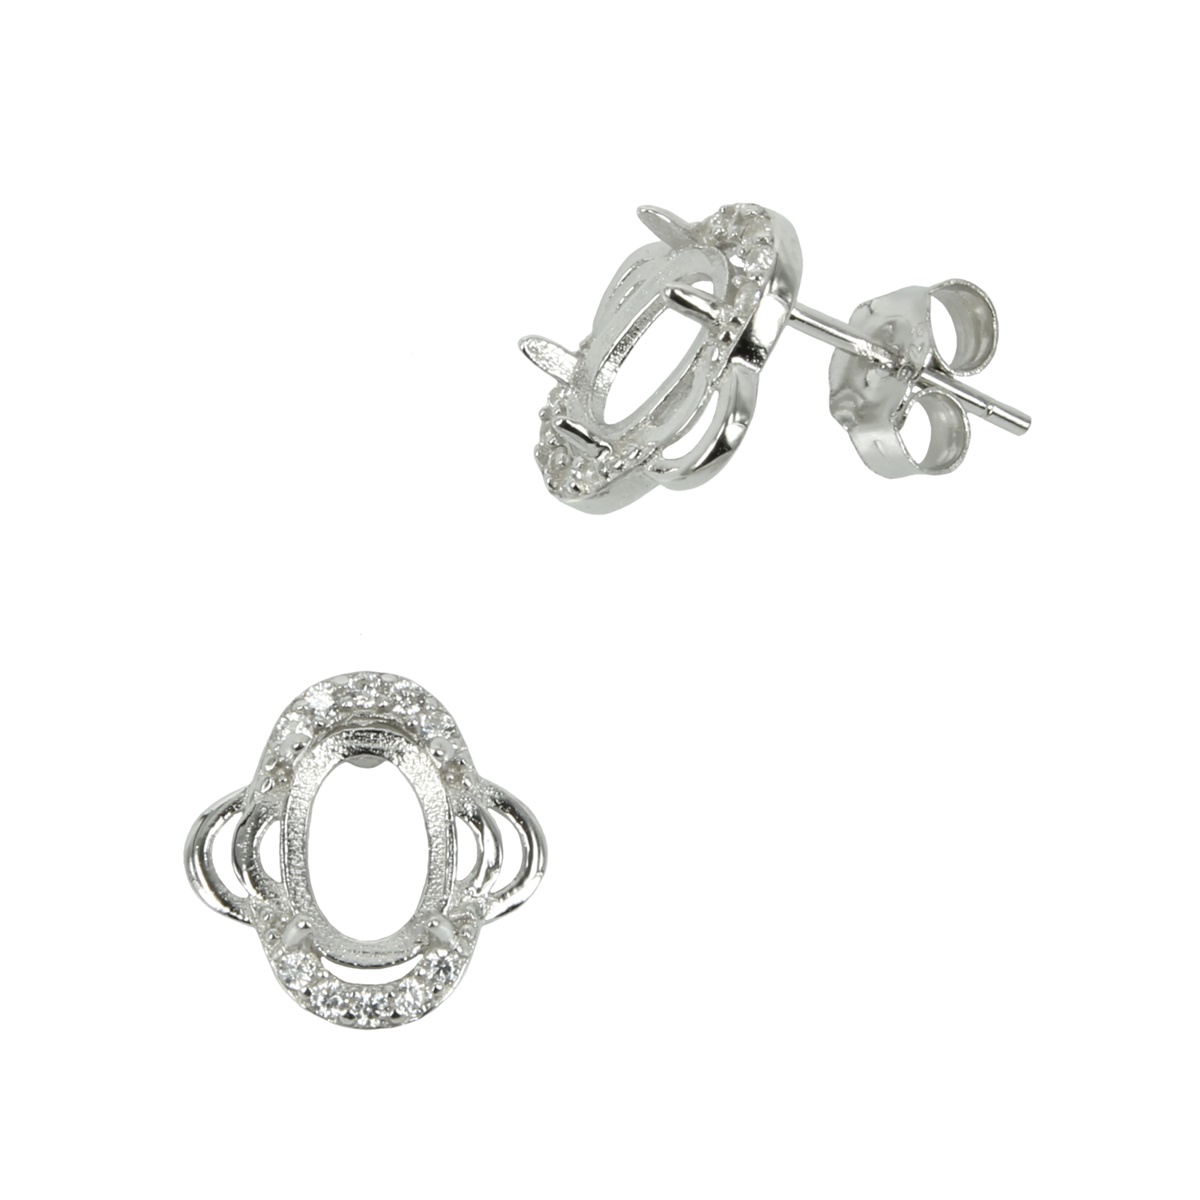 Quatrefoil CZ Border Stud Earrings with Oval Prong Mounting in Sterling Silver for 5x7mm Stones 